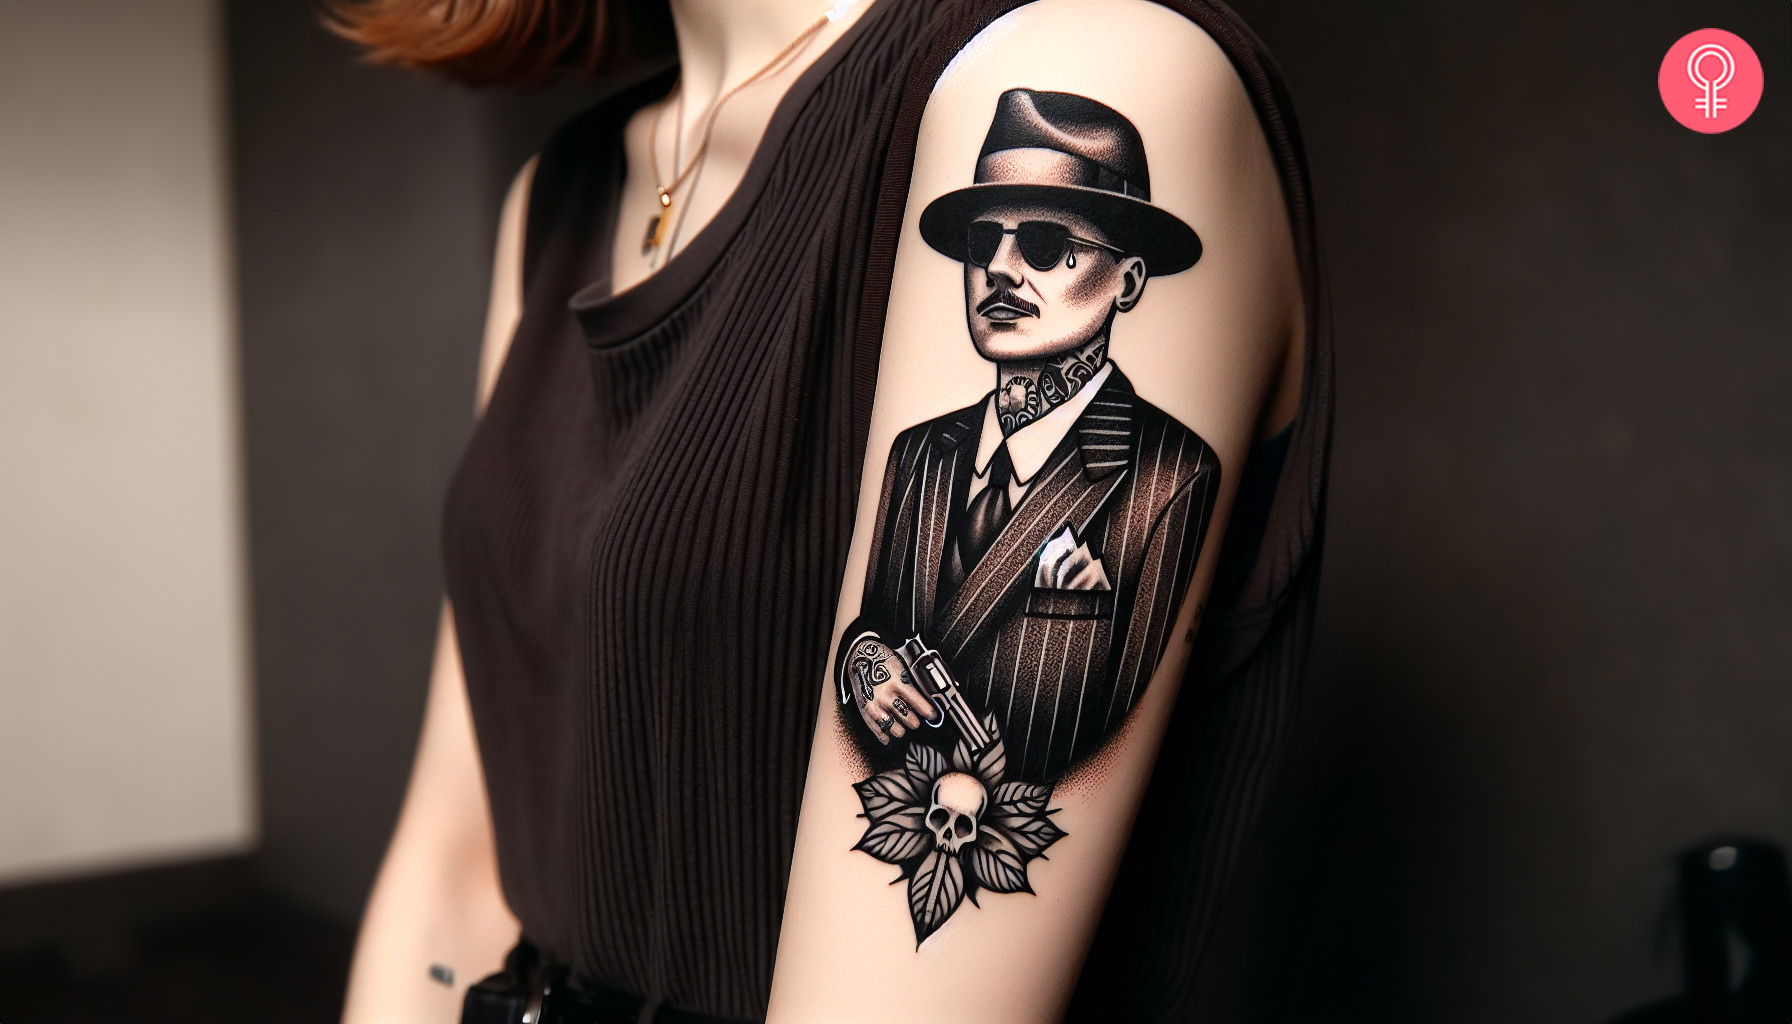 A Chicano gangster tattoo on the arm